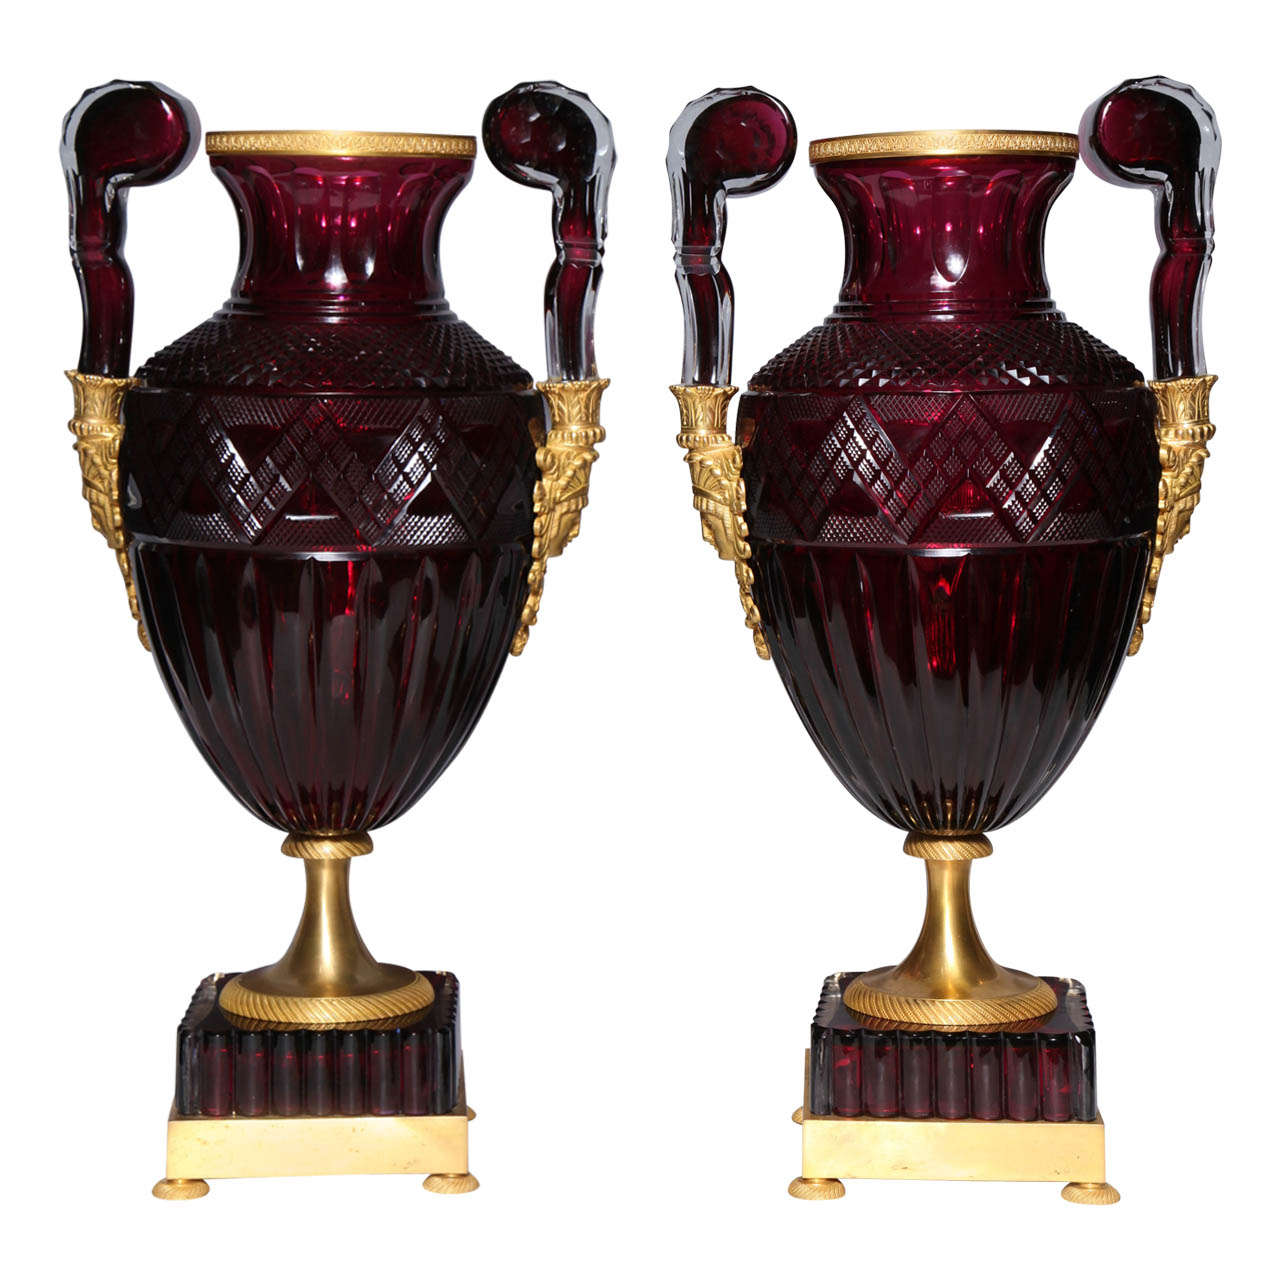 Magnificent Pair of Russian Imperial Ruby Glass Vases w/ Gilded Bronze Mounts For Sale